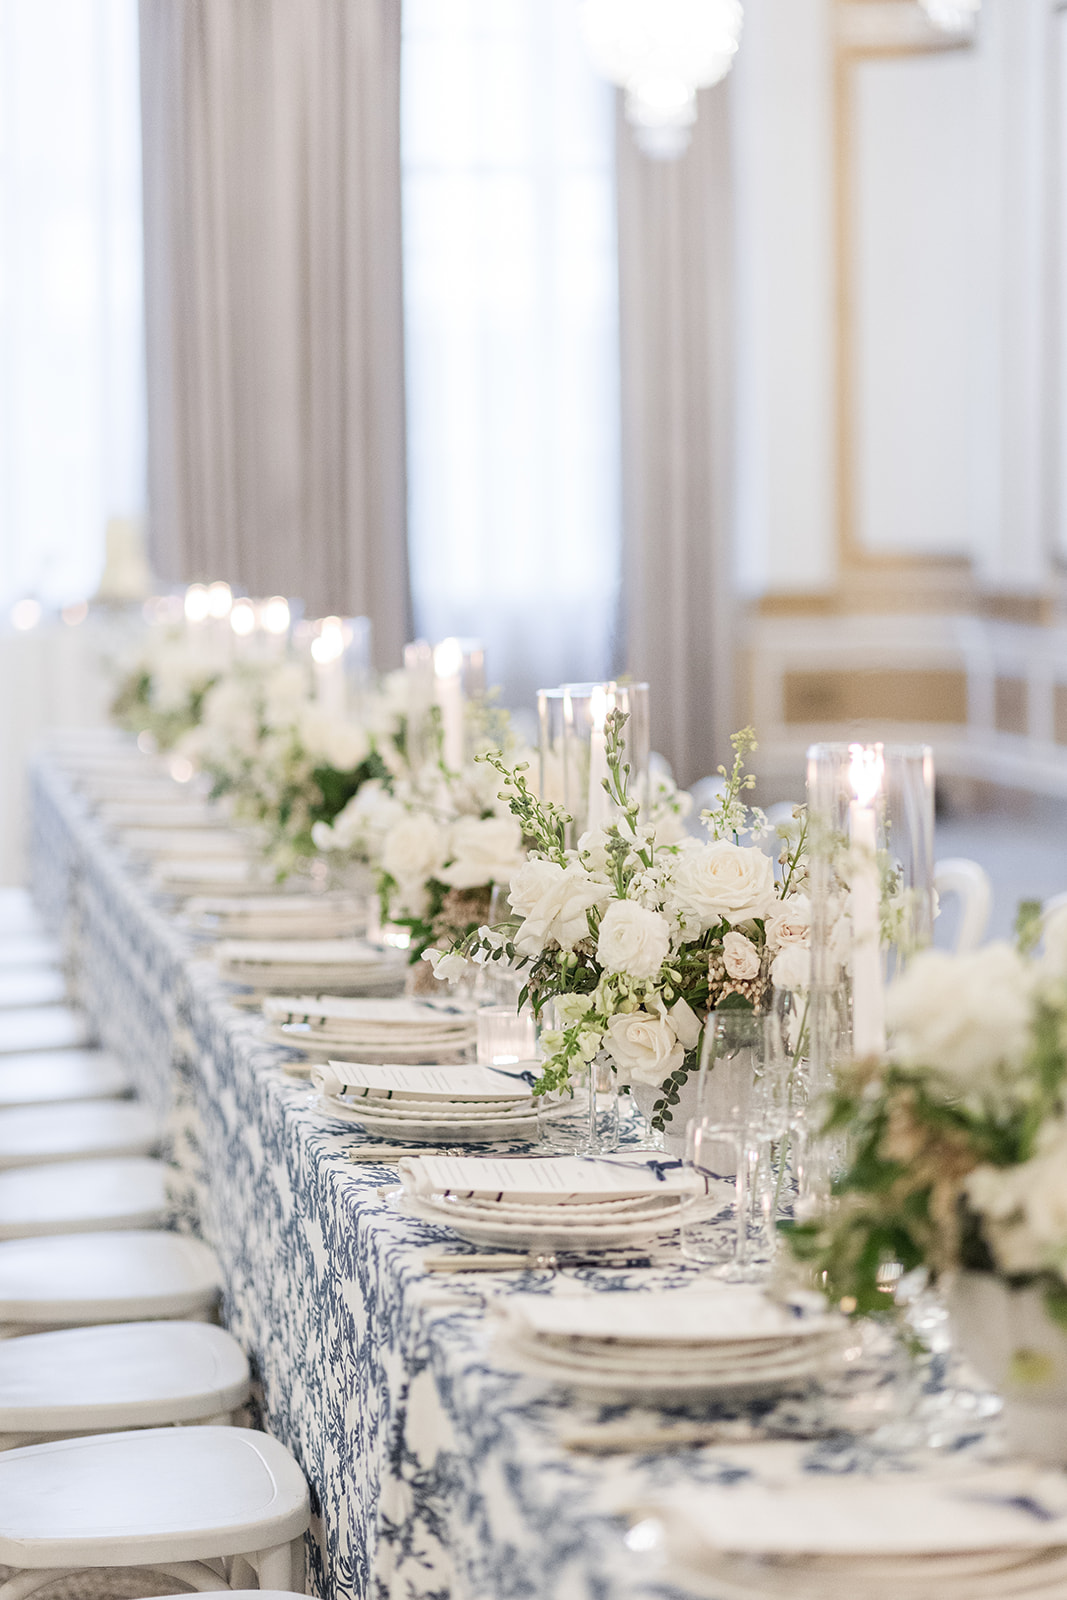 A beautiful wedding reception tablescape with white flowers and candles done up at The Benson Hotel Portland's Crystal Ballroom.